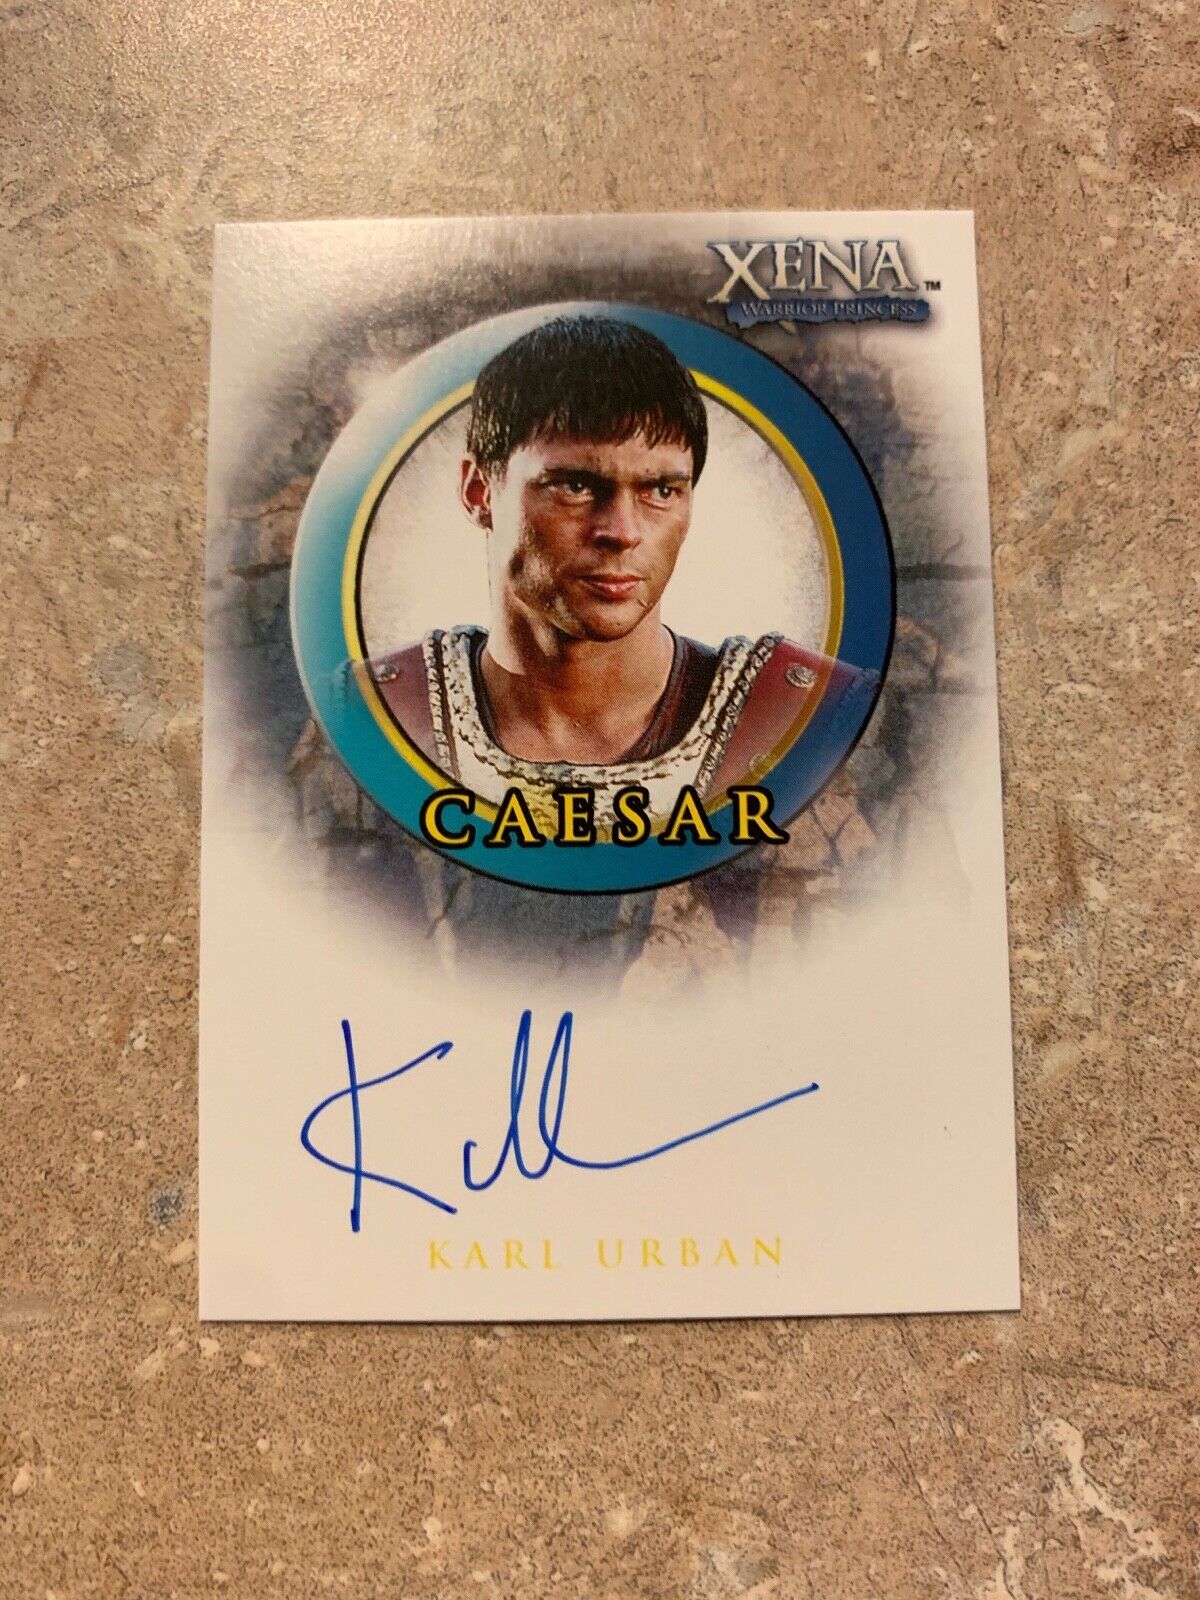 Karl Urban Limited Edition Xena Caesar Autographed Card A20 Ritten House Cards